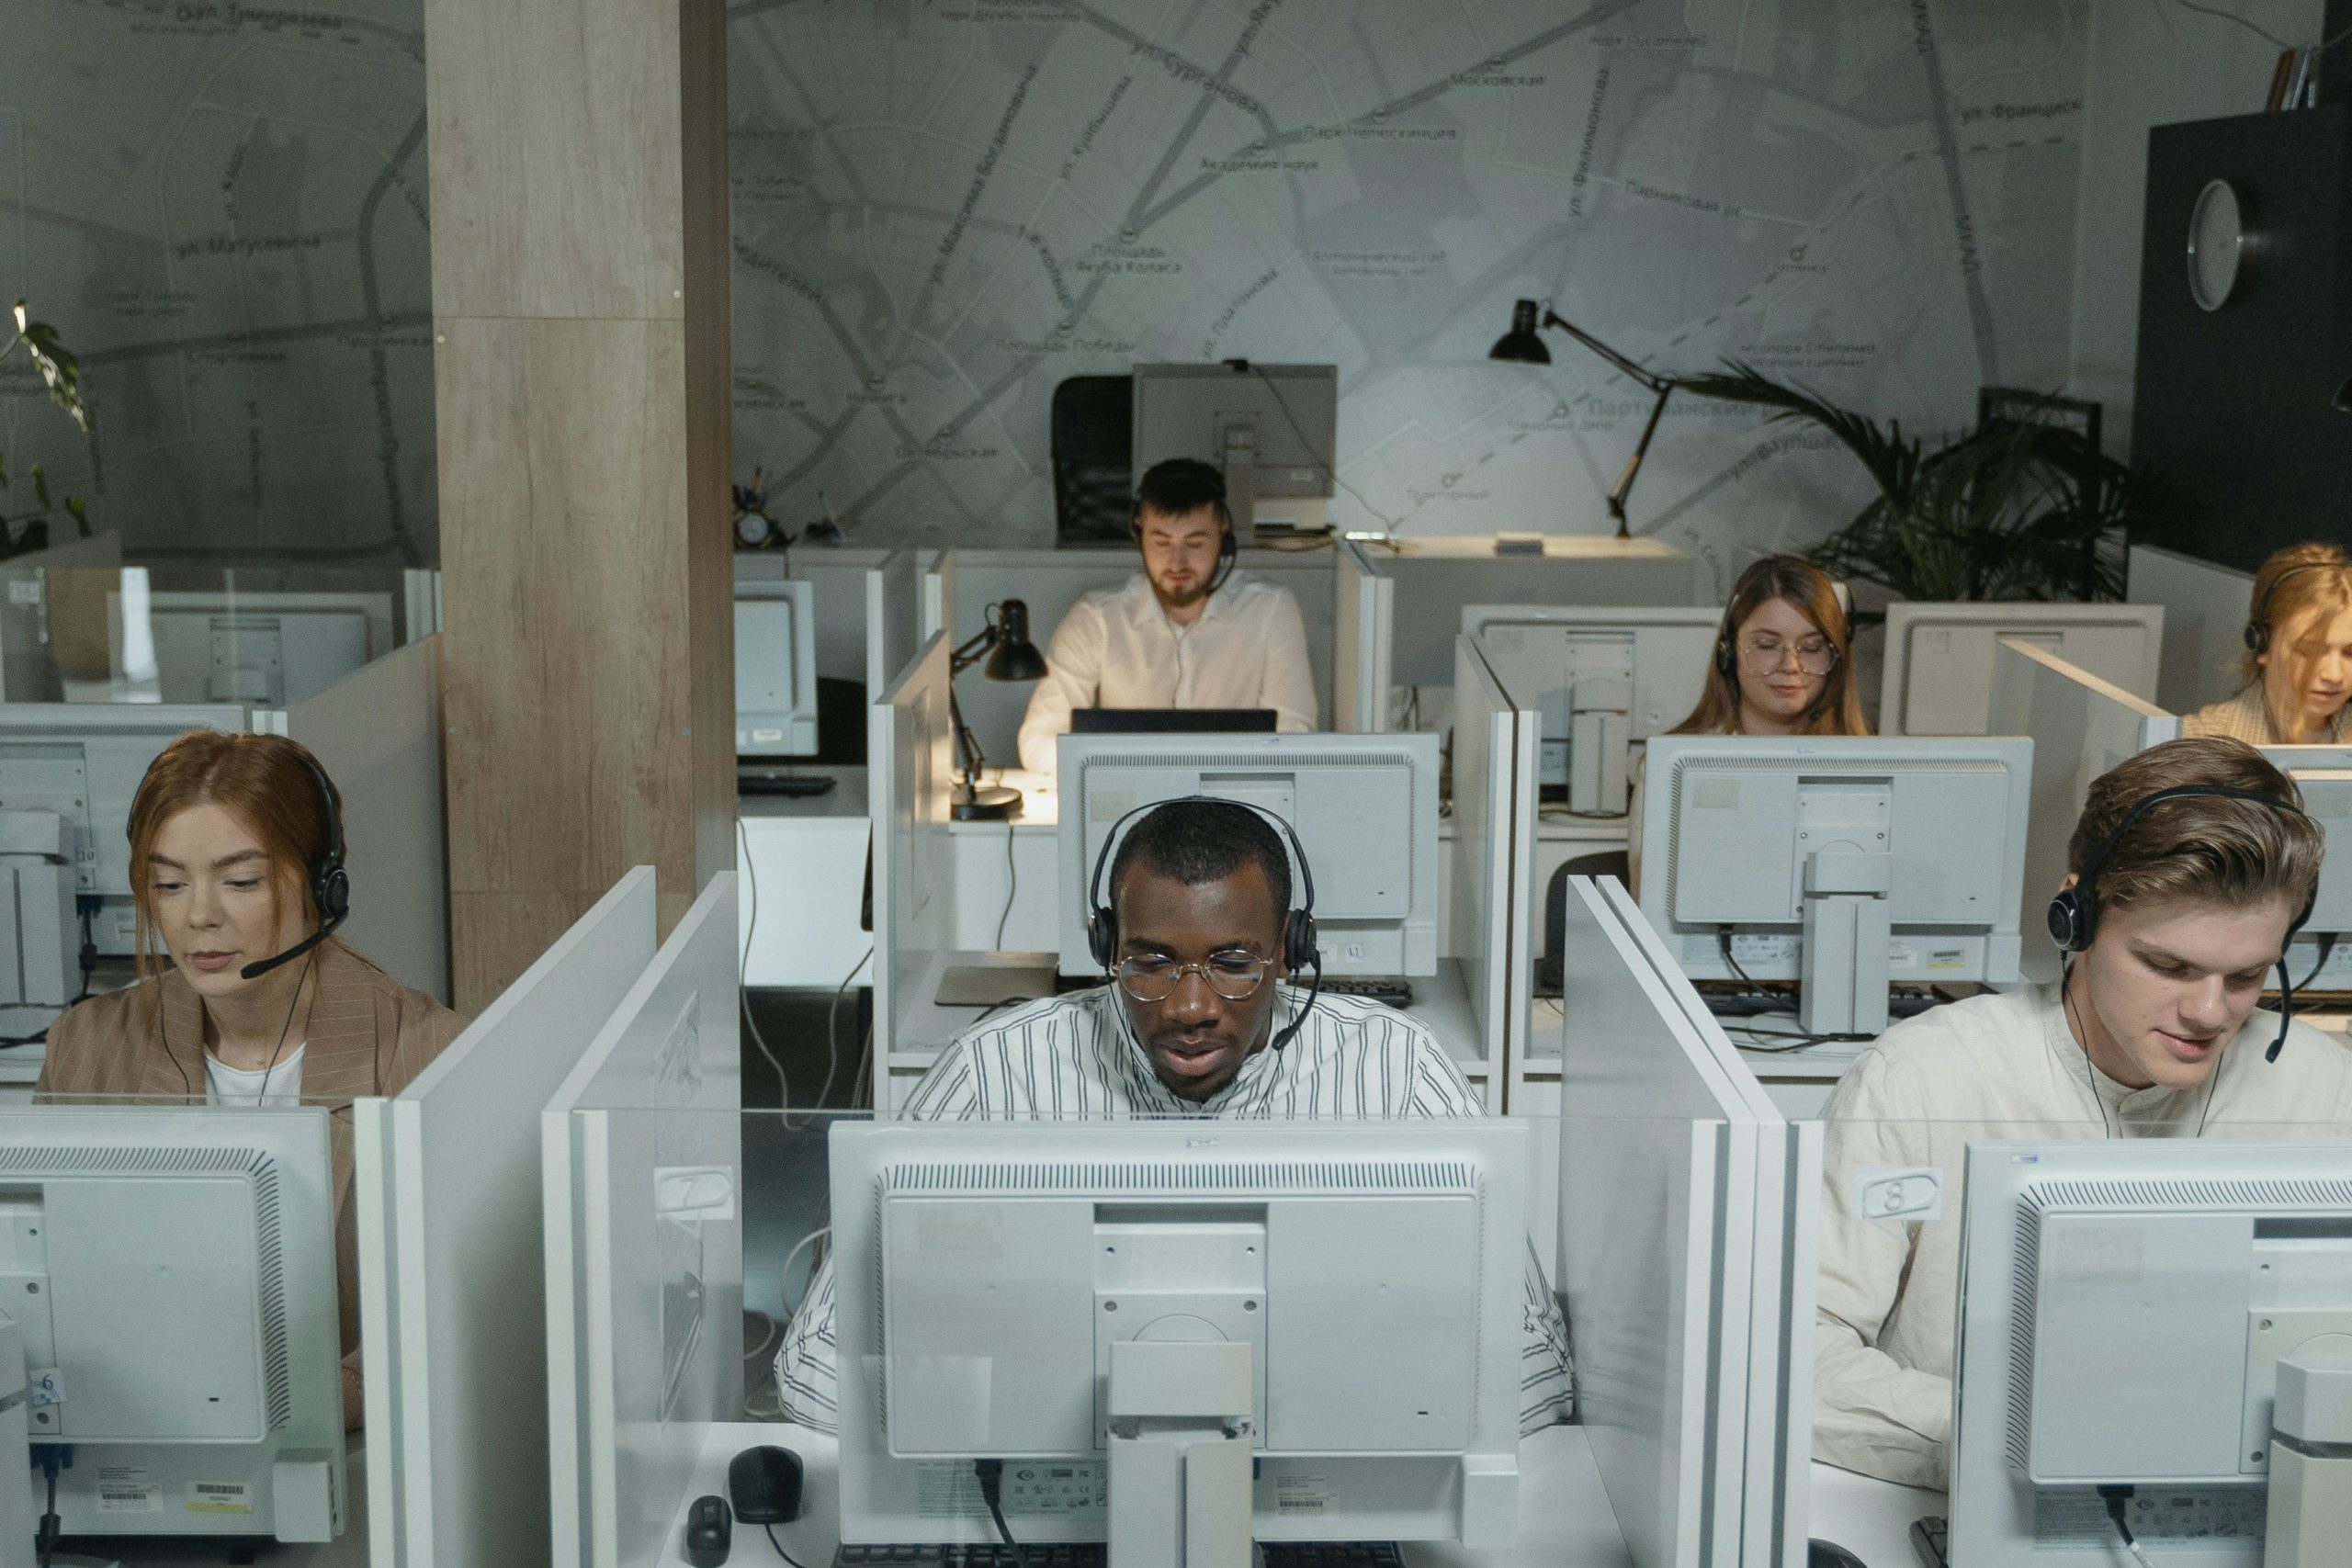 A diverse group of call center agents focused on their computer screens in a modern office setup, illustrating a busy call center environment.